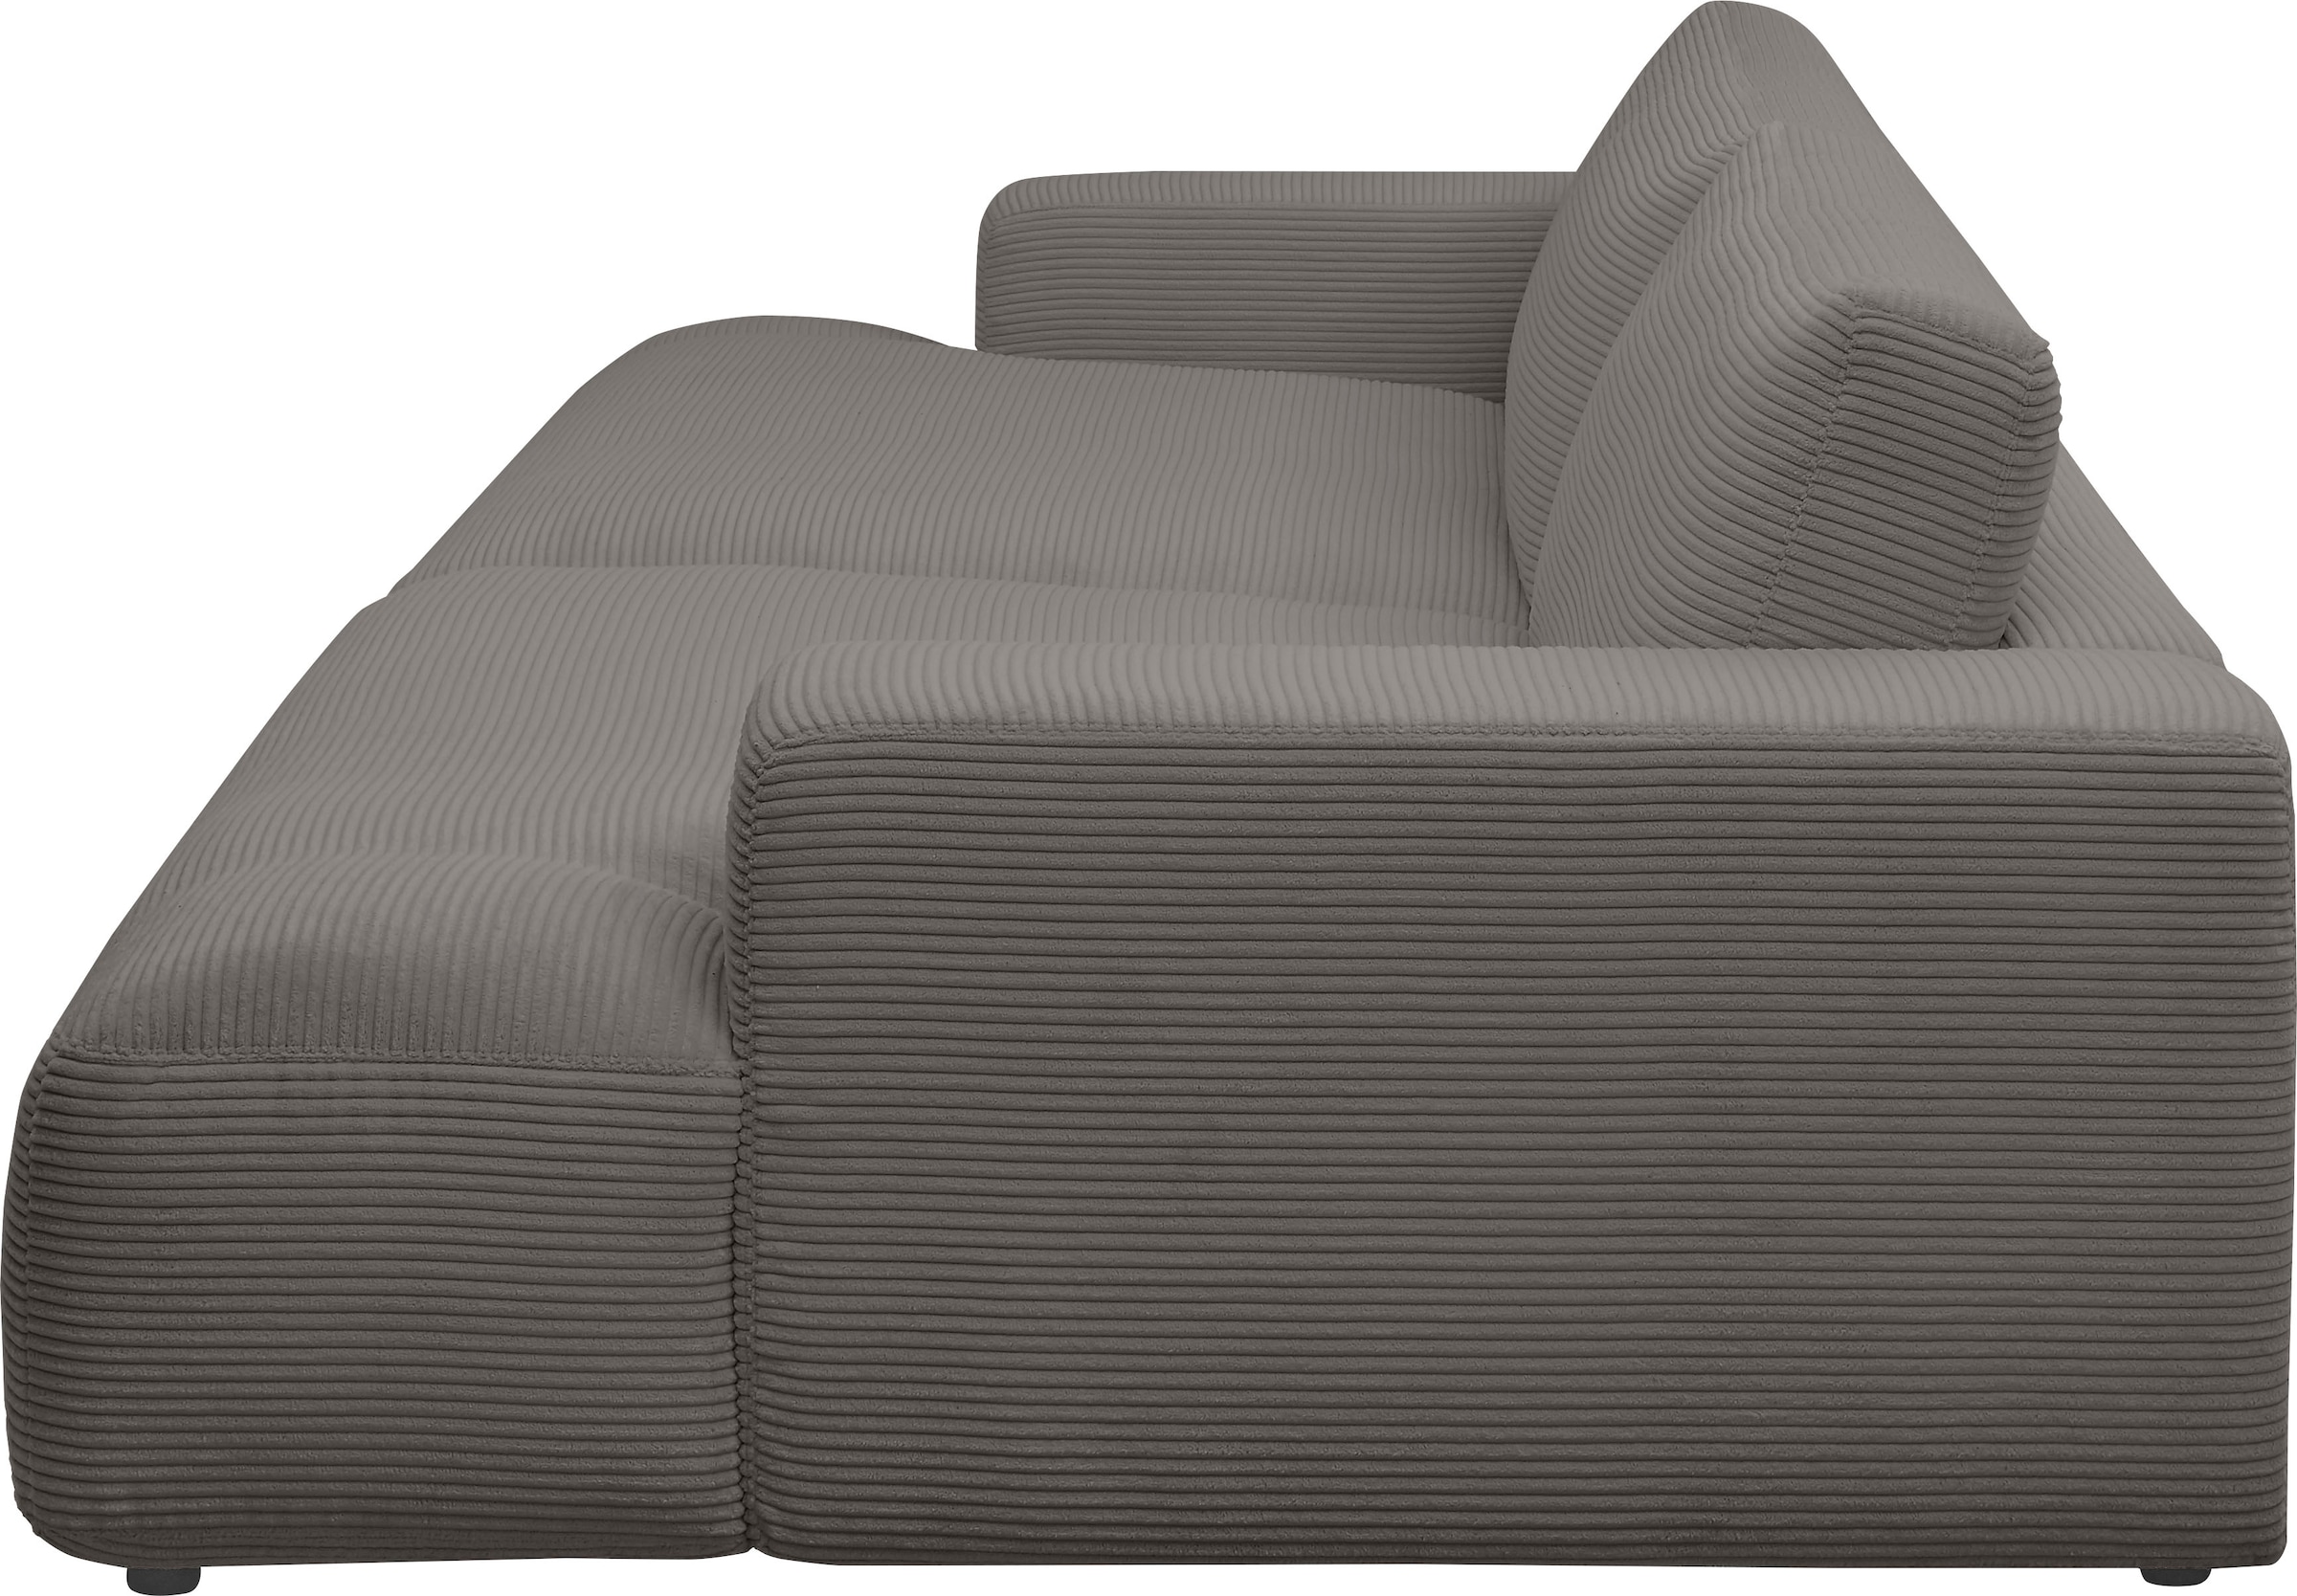 GALLERY 292 Cord-Bezug, Musterring Loungesofa by branded Shop Online »Lucia«, OTTO cm M Breite